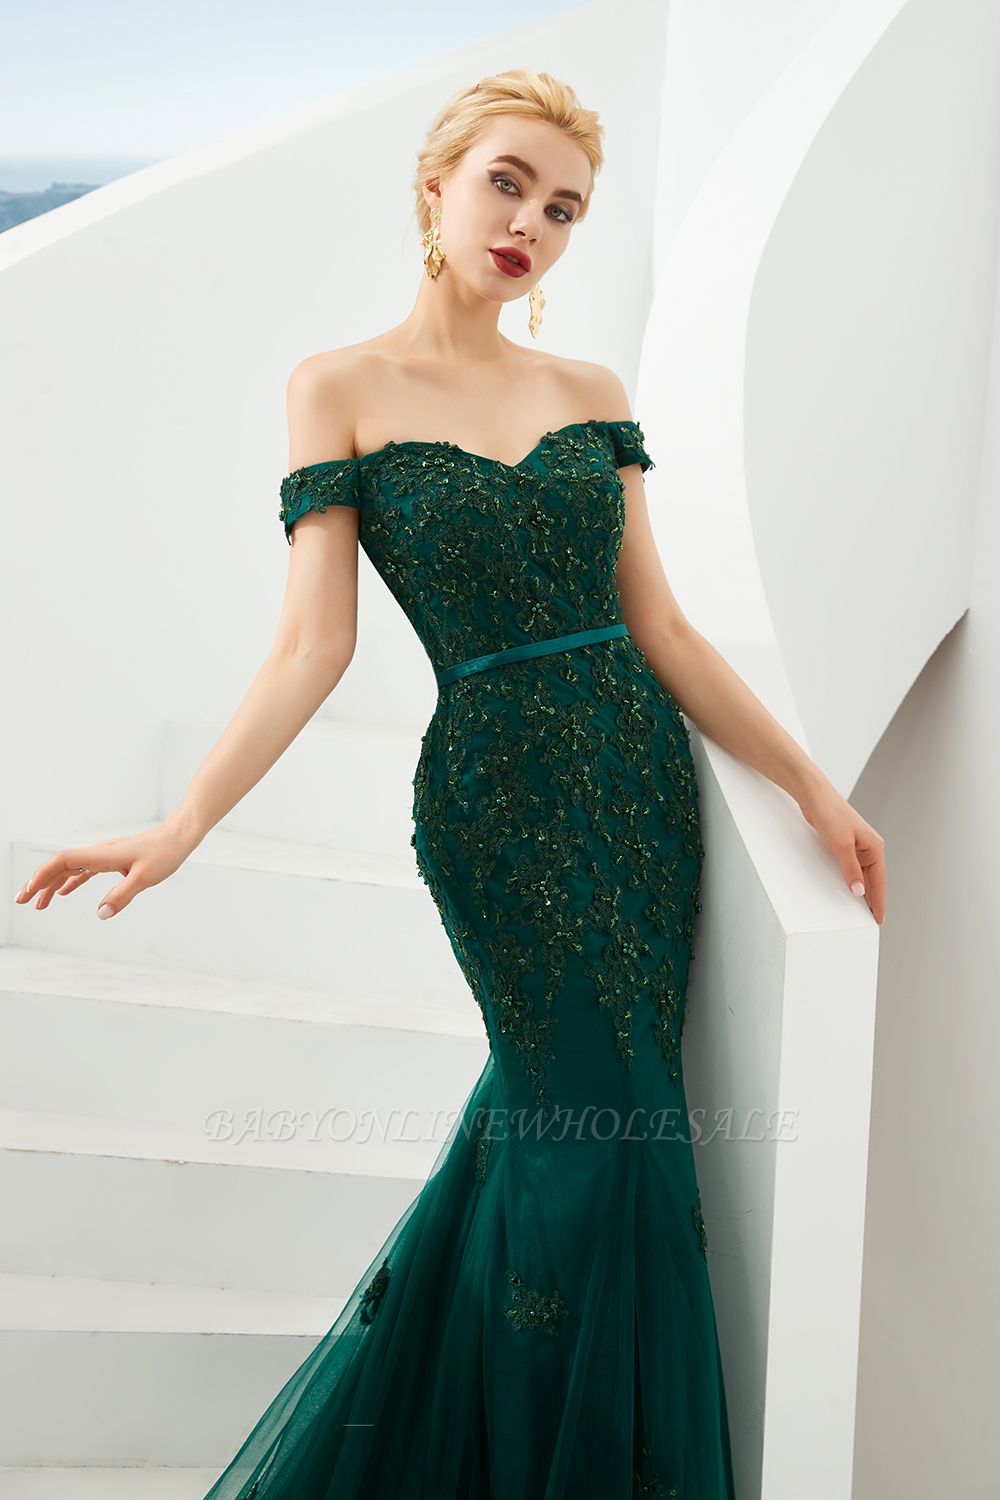 Harvey | Emerald green Mermaid Tulle Prom dress with Beaded Lace ...